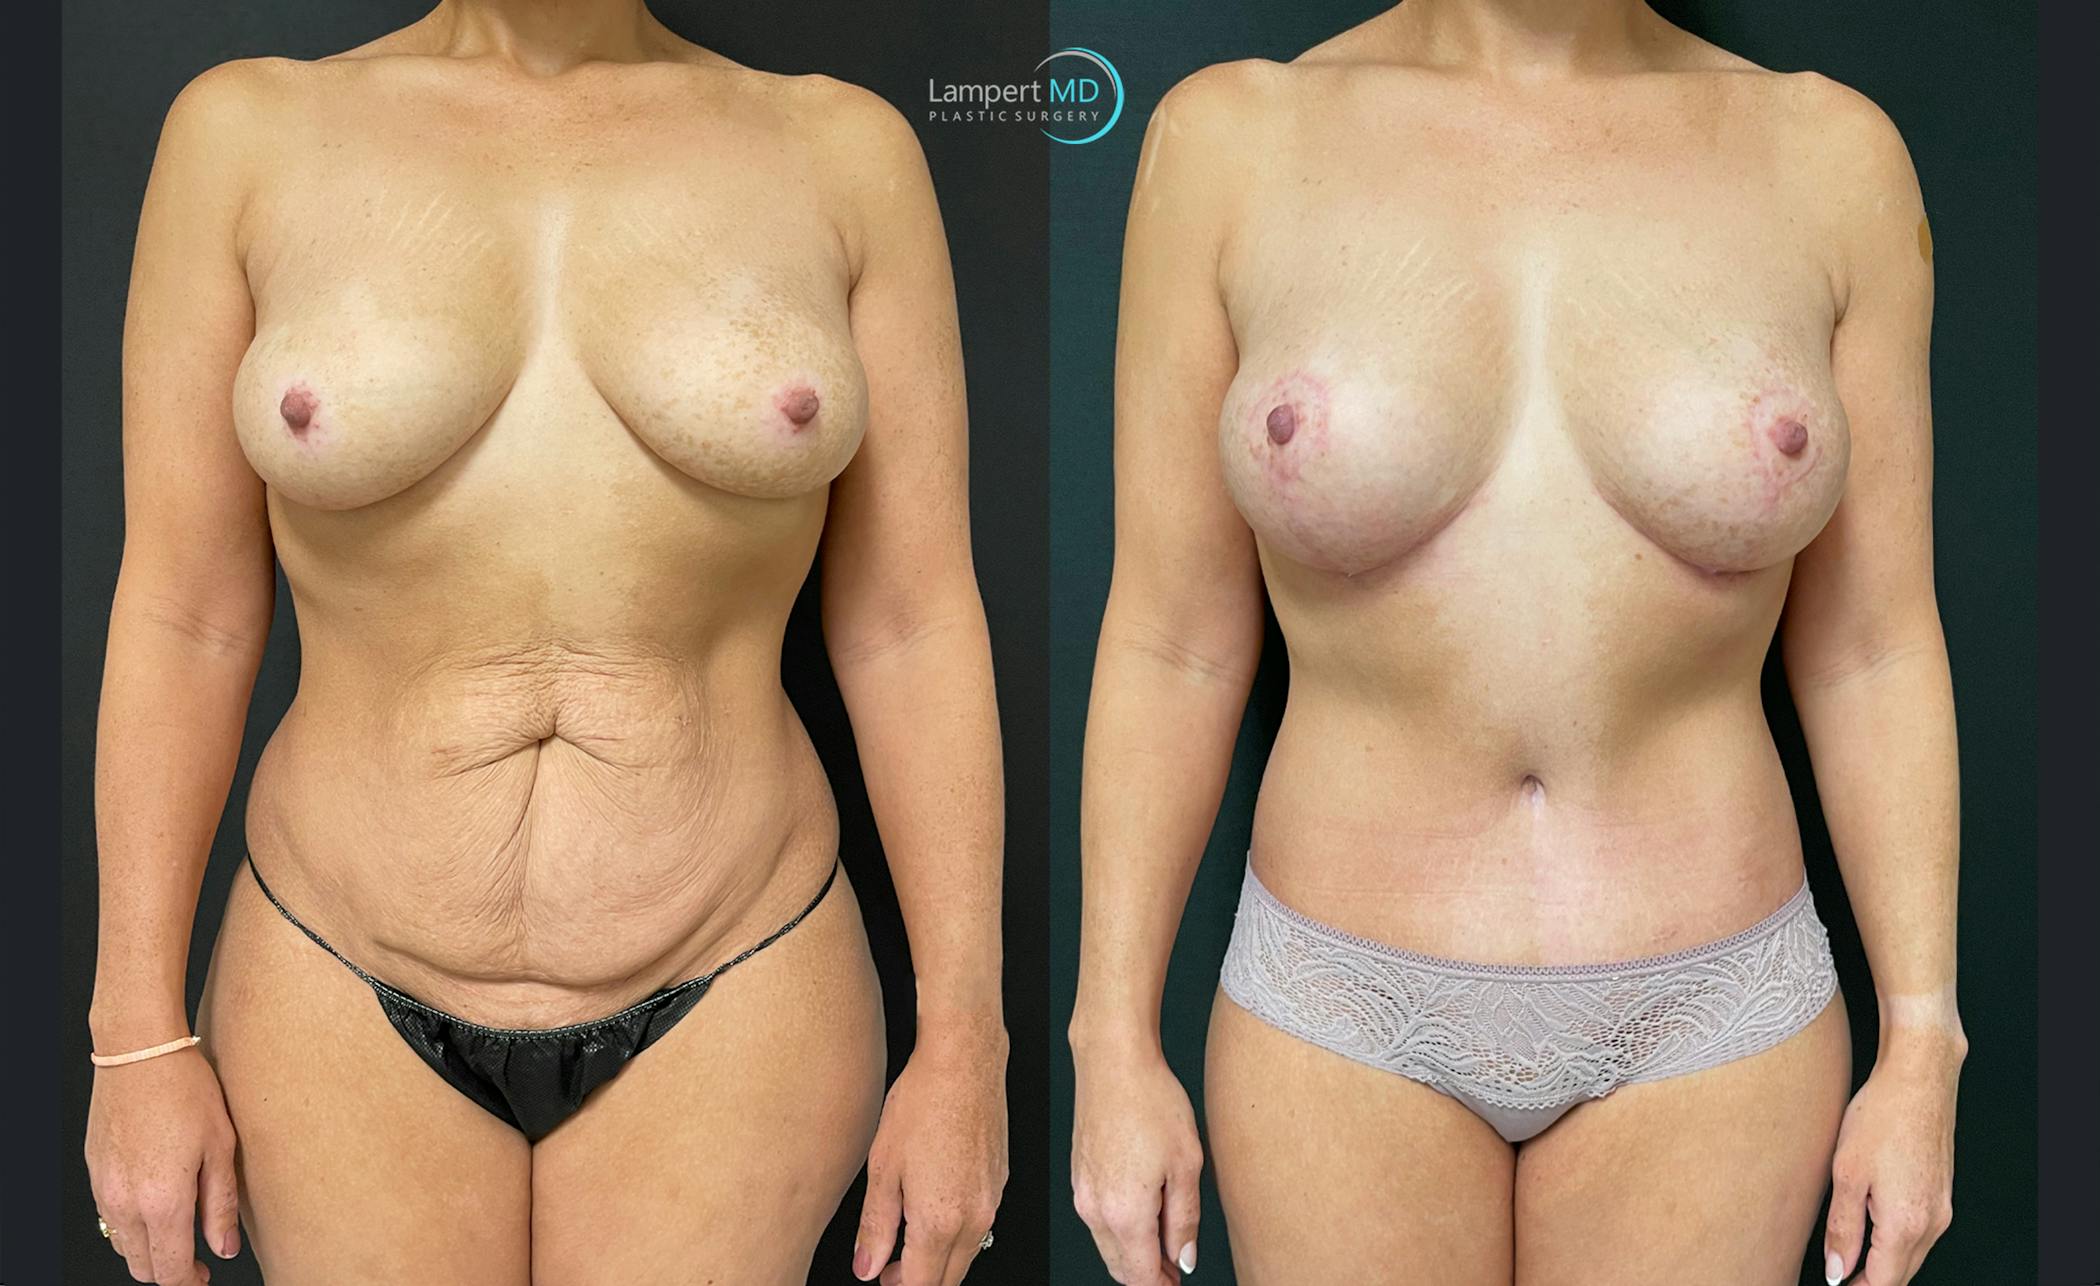 Before and after Tummy Tuck surgery in Miami with Dr. Lampert